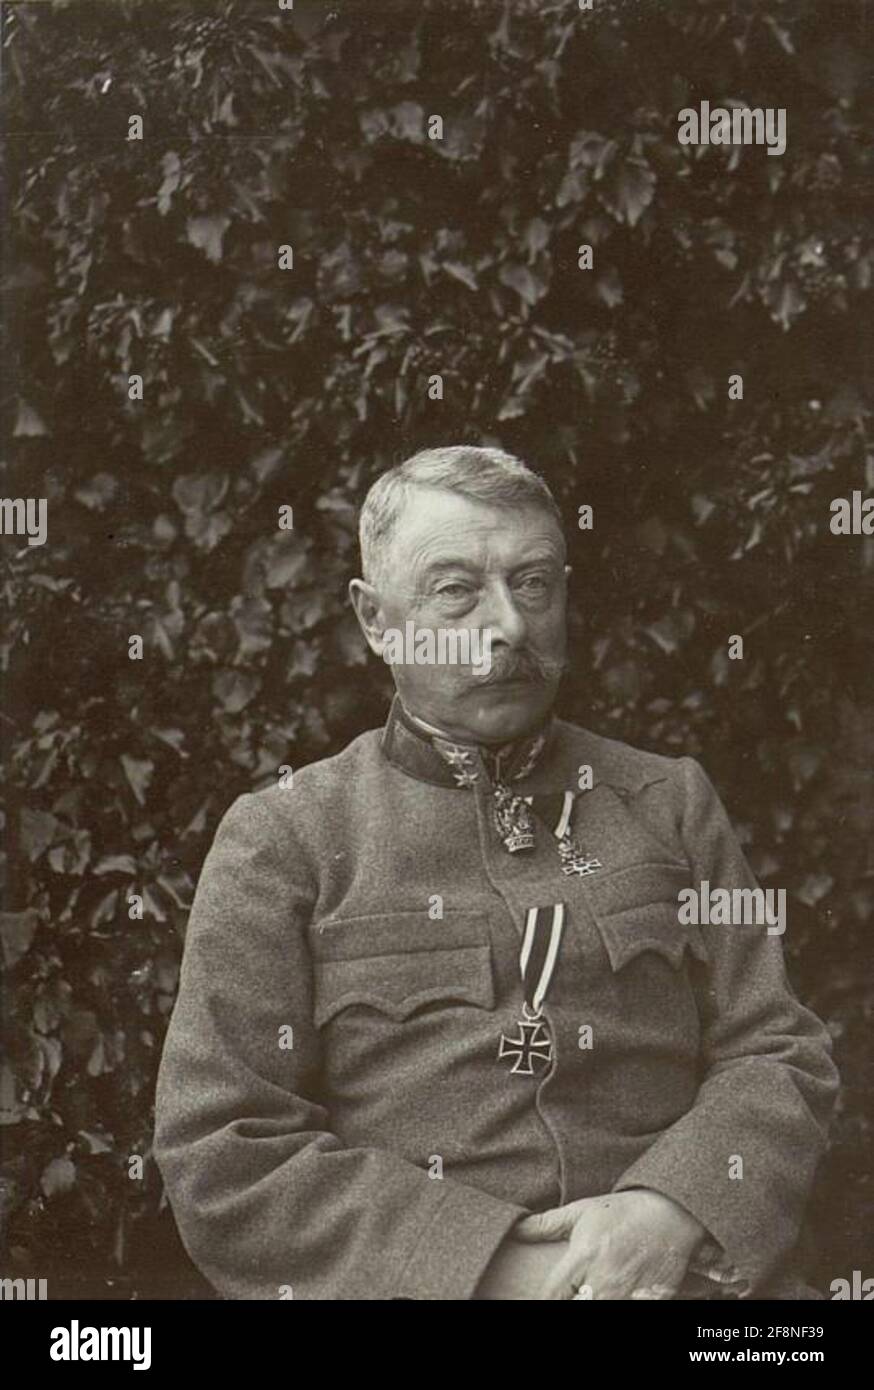 Feldmarschalleutenant Joseph Schneider, noble of Manns-AU, commander of the 28th infantry division, belonging to the 5th army carrier (among others) of the Maria Theresien Order Stock Photo